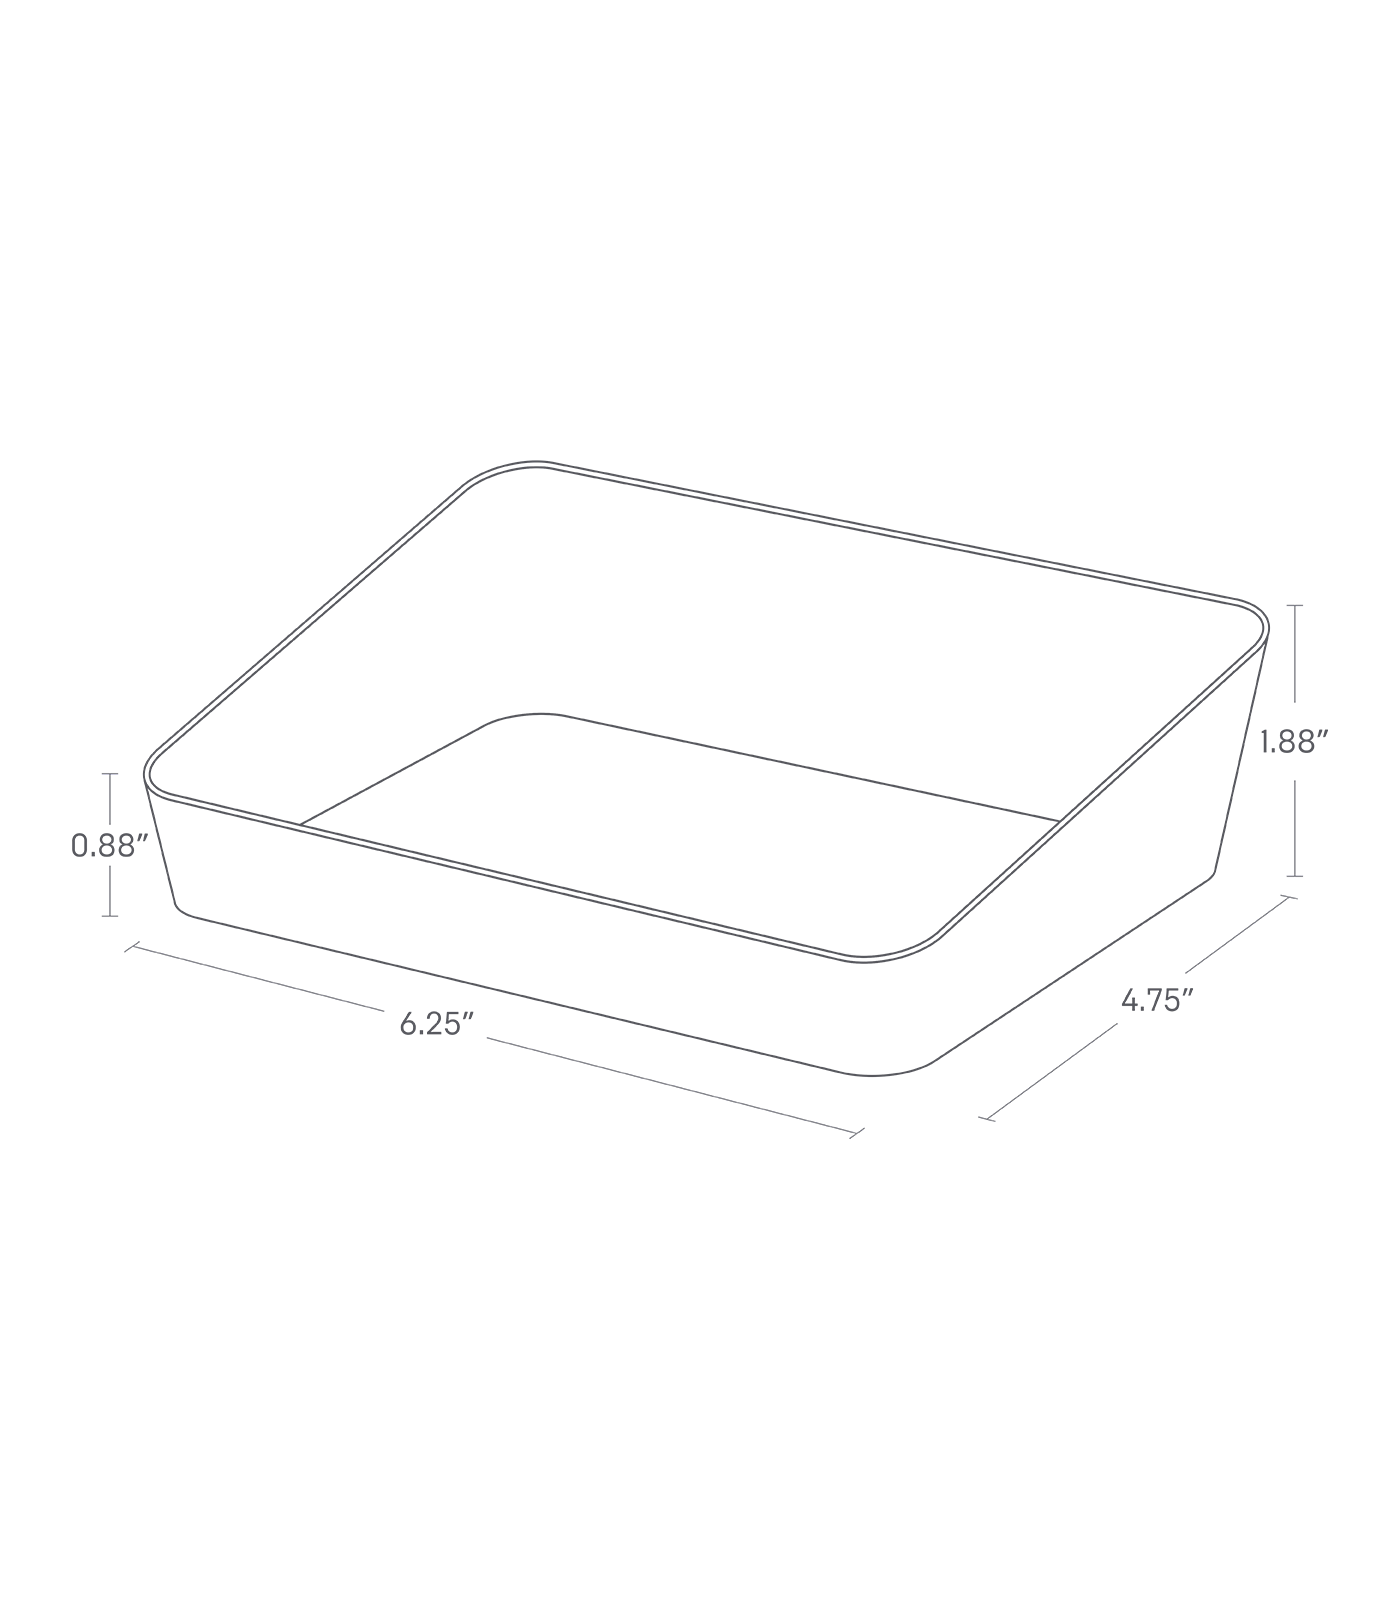 Dimension image for Vanity Tray - Angled - Two Sizeson a white background showinglength of 6.25